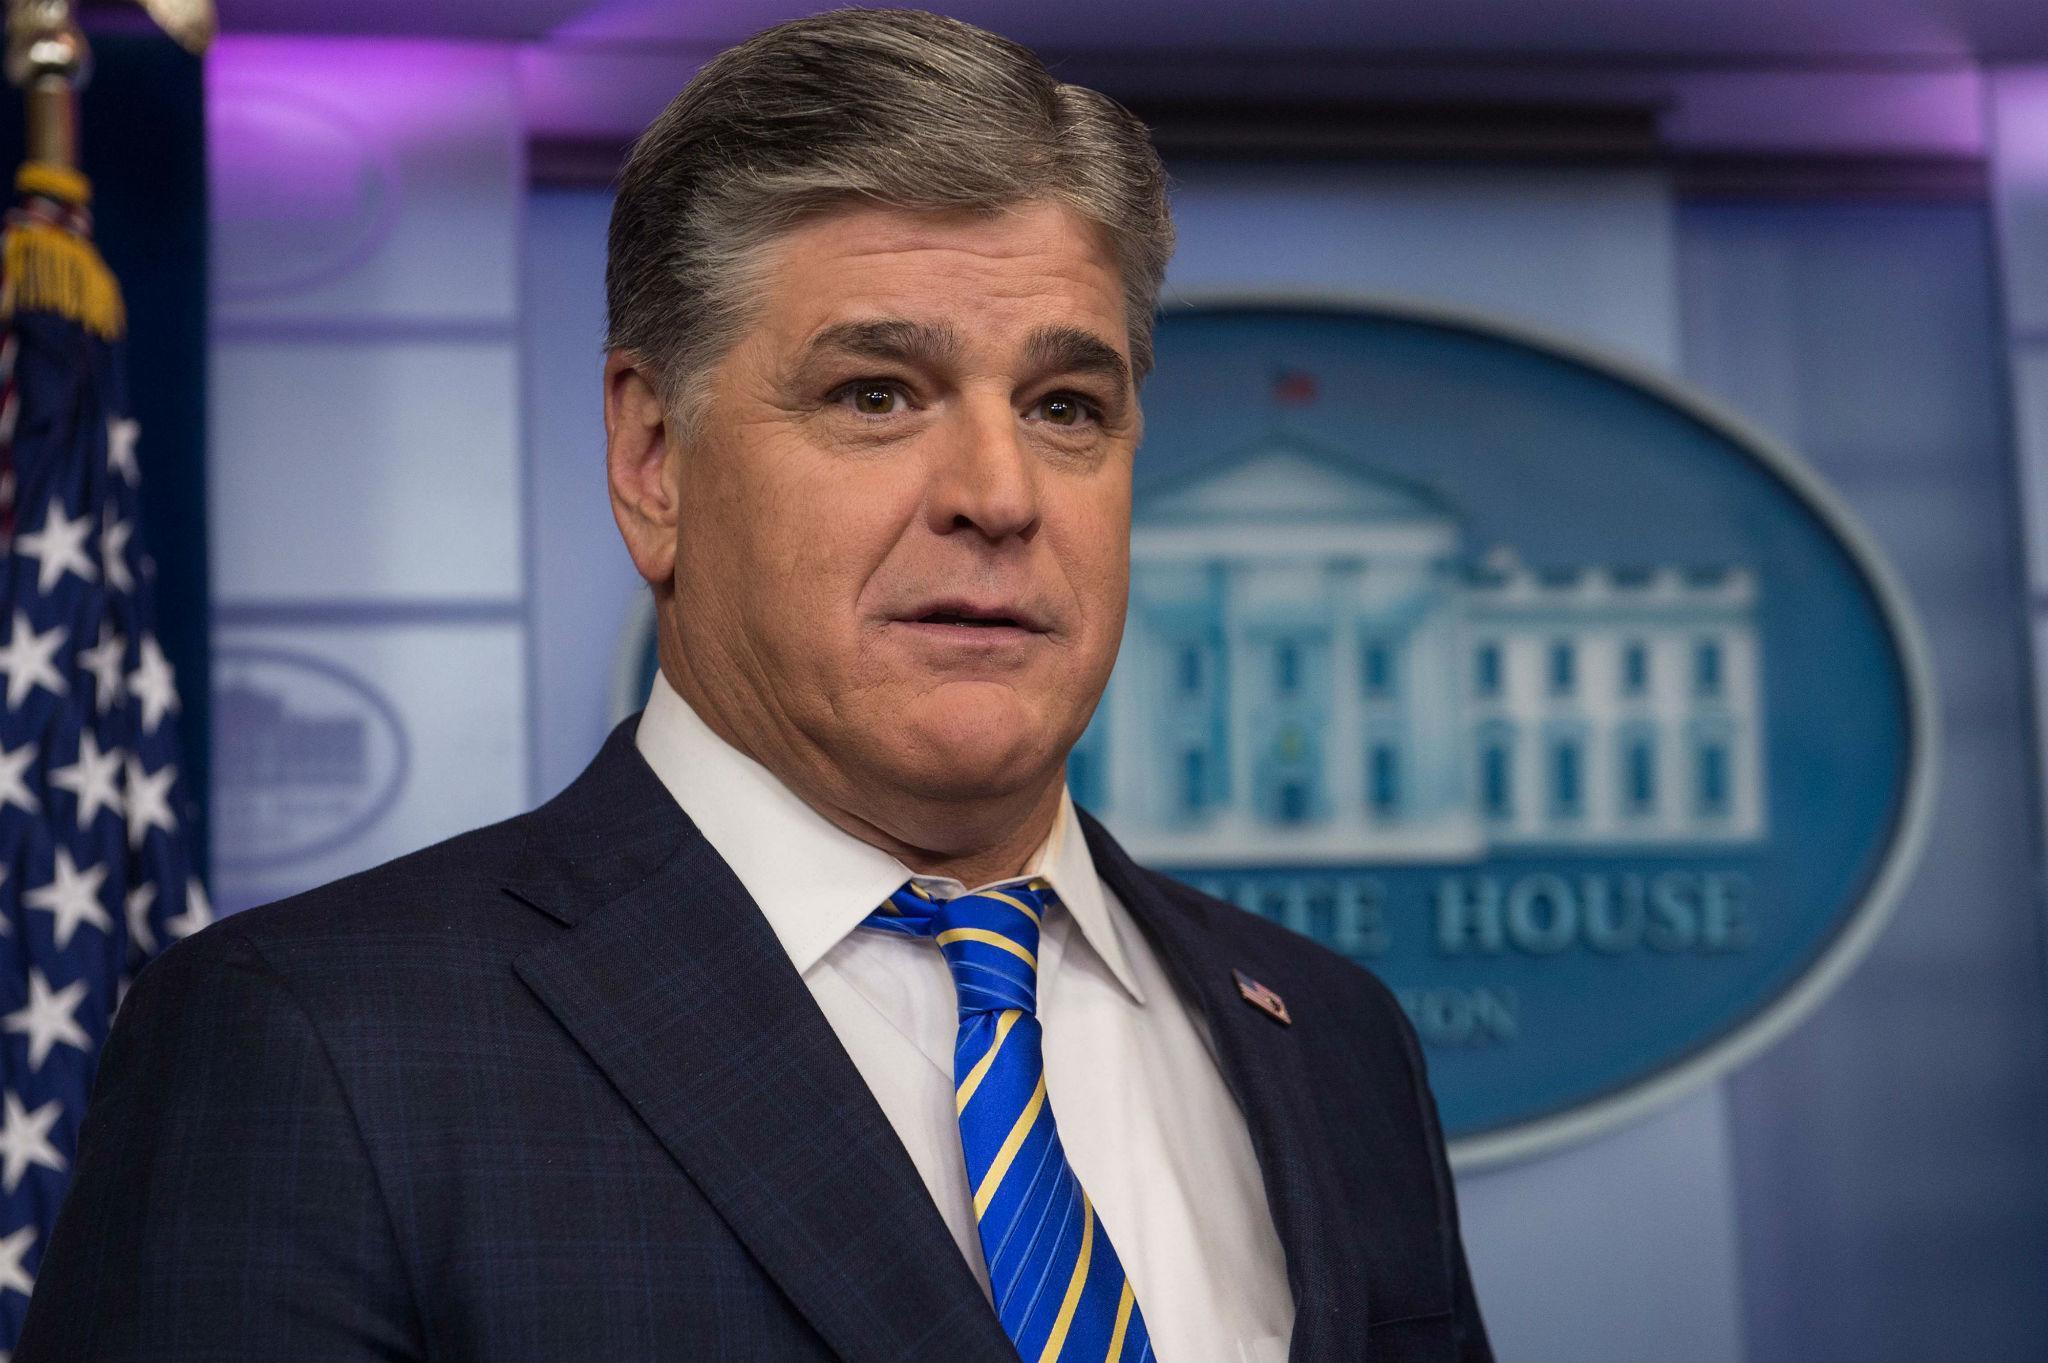 Sean Hannity, the fervently pro-Trump Fox News host, has seen his book reach the top of the bestsellers list